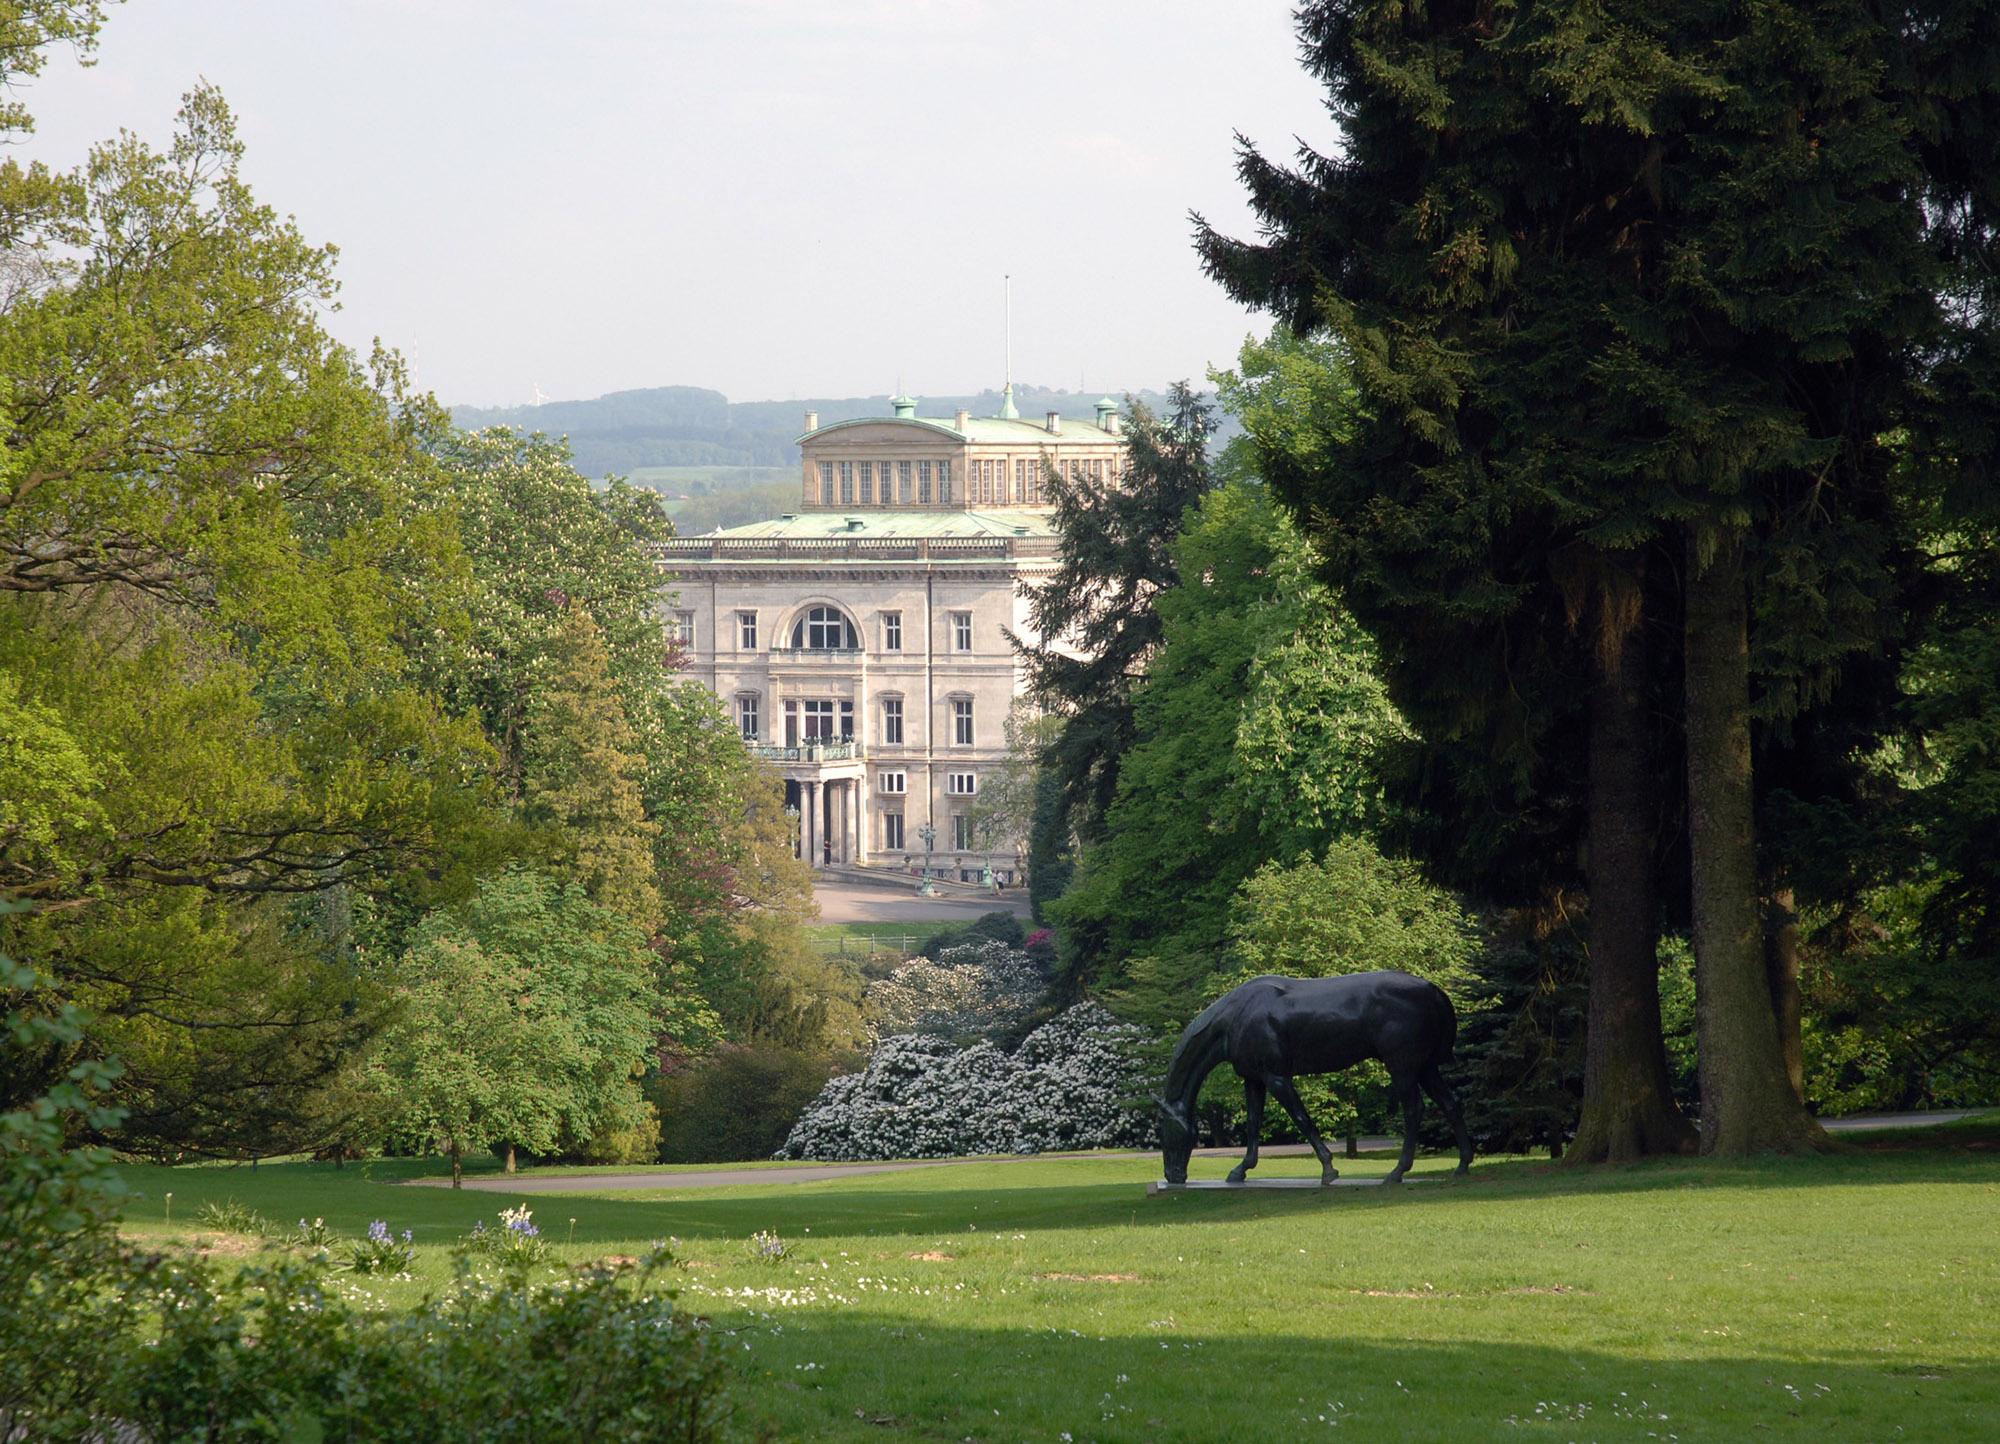 Relaxing views of Villa Hügel, like the one from Albert Hinrich Hussmann's horse sculpture in the foreground, welcome visitors. – © Editorial Staff / City of Essen